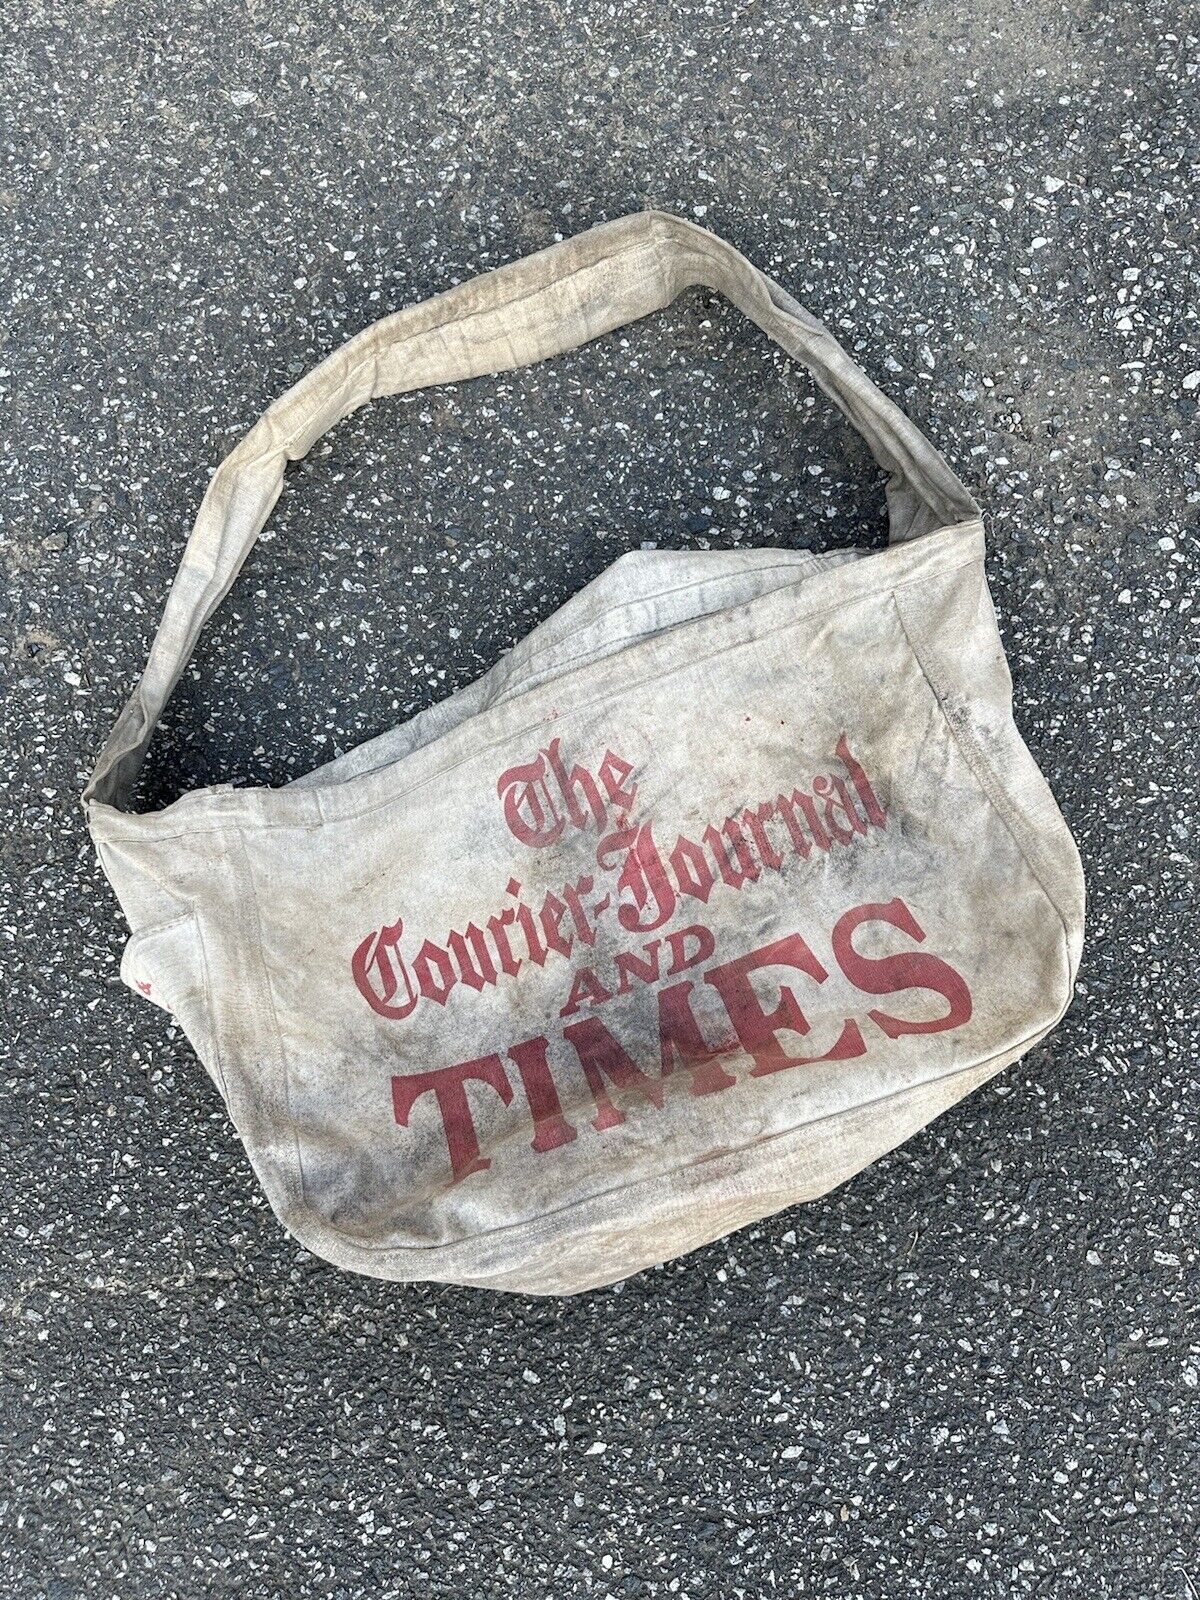 the courier journal And Times newspaper Bag Vintage Louisville Ky 